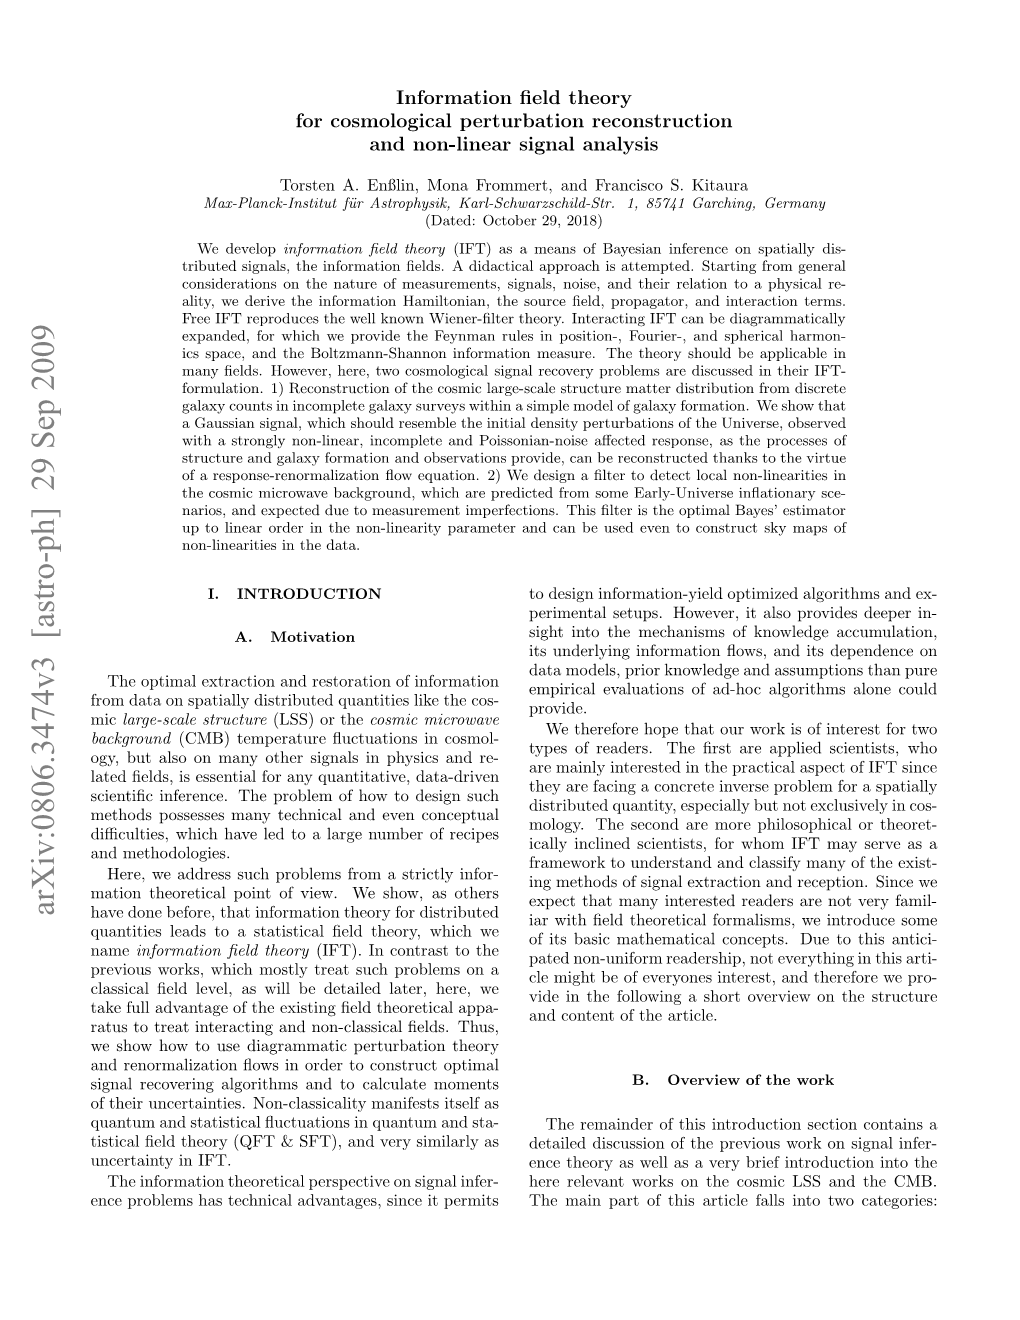 Information Field Theory for Cosmological Perturbation